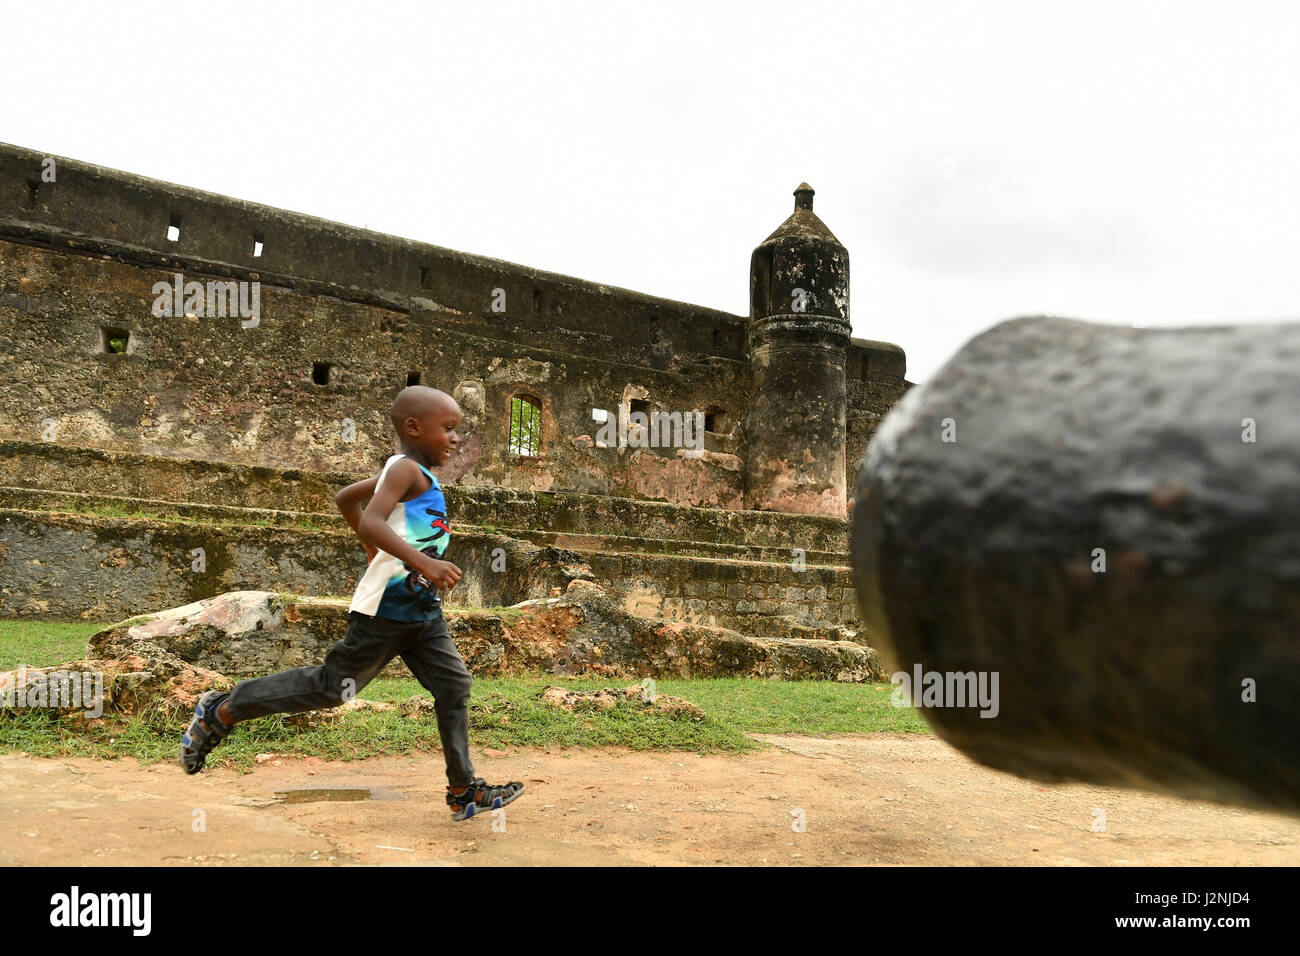 Mombasa, Kenya. 29th Apr, 2017. A boy runs past an old cannon at Fort Jesus in Mombasa, Kenya, April 29, 2017. Located in the Southeastern corner of Mombasa city, Fort Jesus was built by Portuguese colonists between 1593 and 1596. Fort Jesus is one of the most outstanding and well preserved examples of 16th Portuguese military fortifications and the UNESCO added the the fort to World Heritage List as a cultural site in 2011. Credit: Sun Ruibo/Xinhua/Alamy Live News Stock Photo